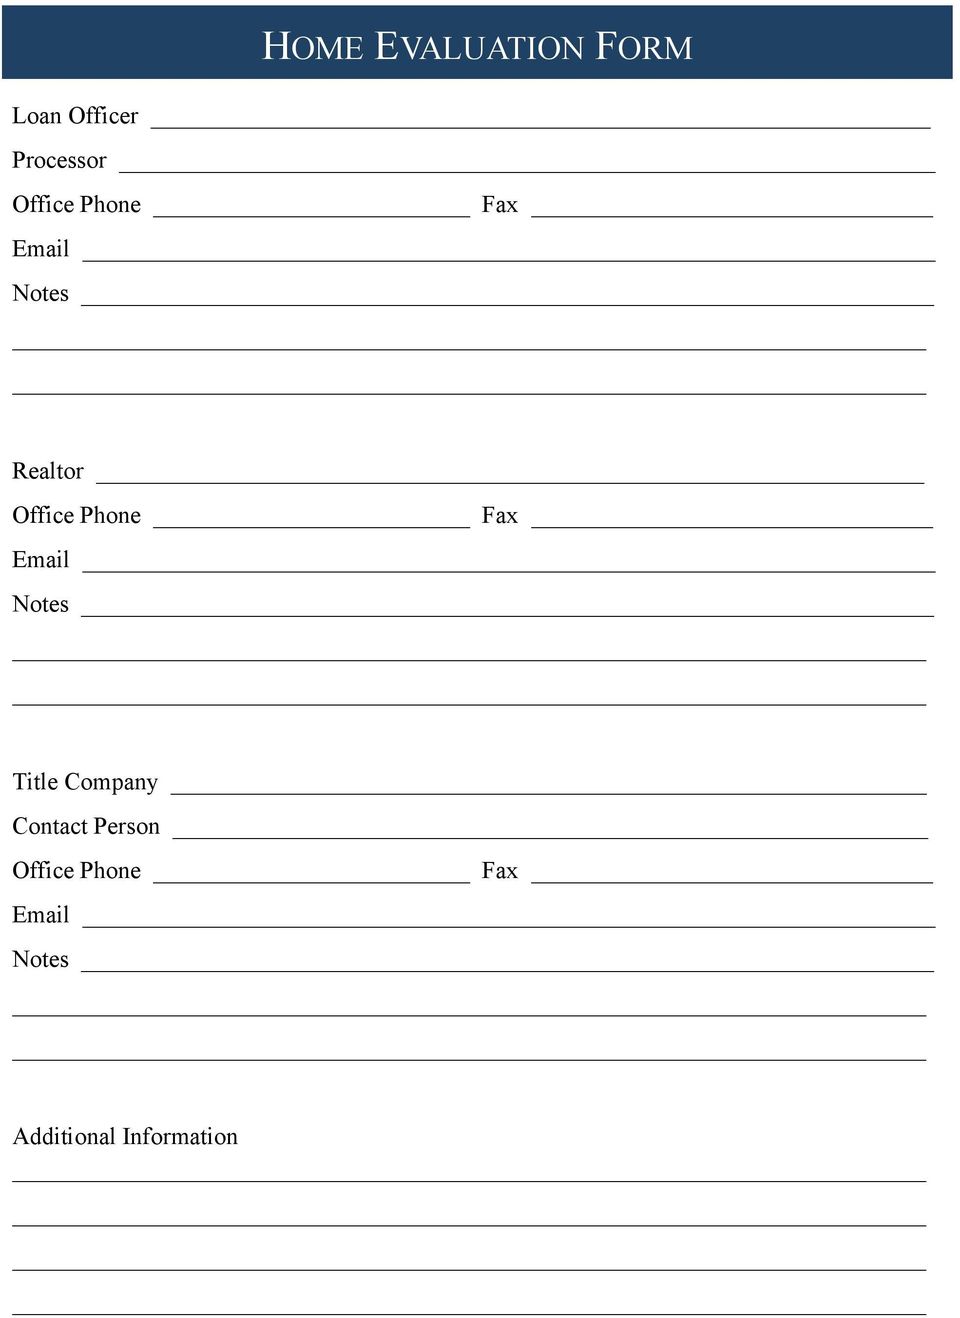 Phone Fax Email Notes Title Company Contact